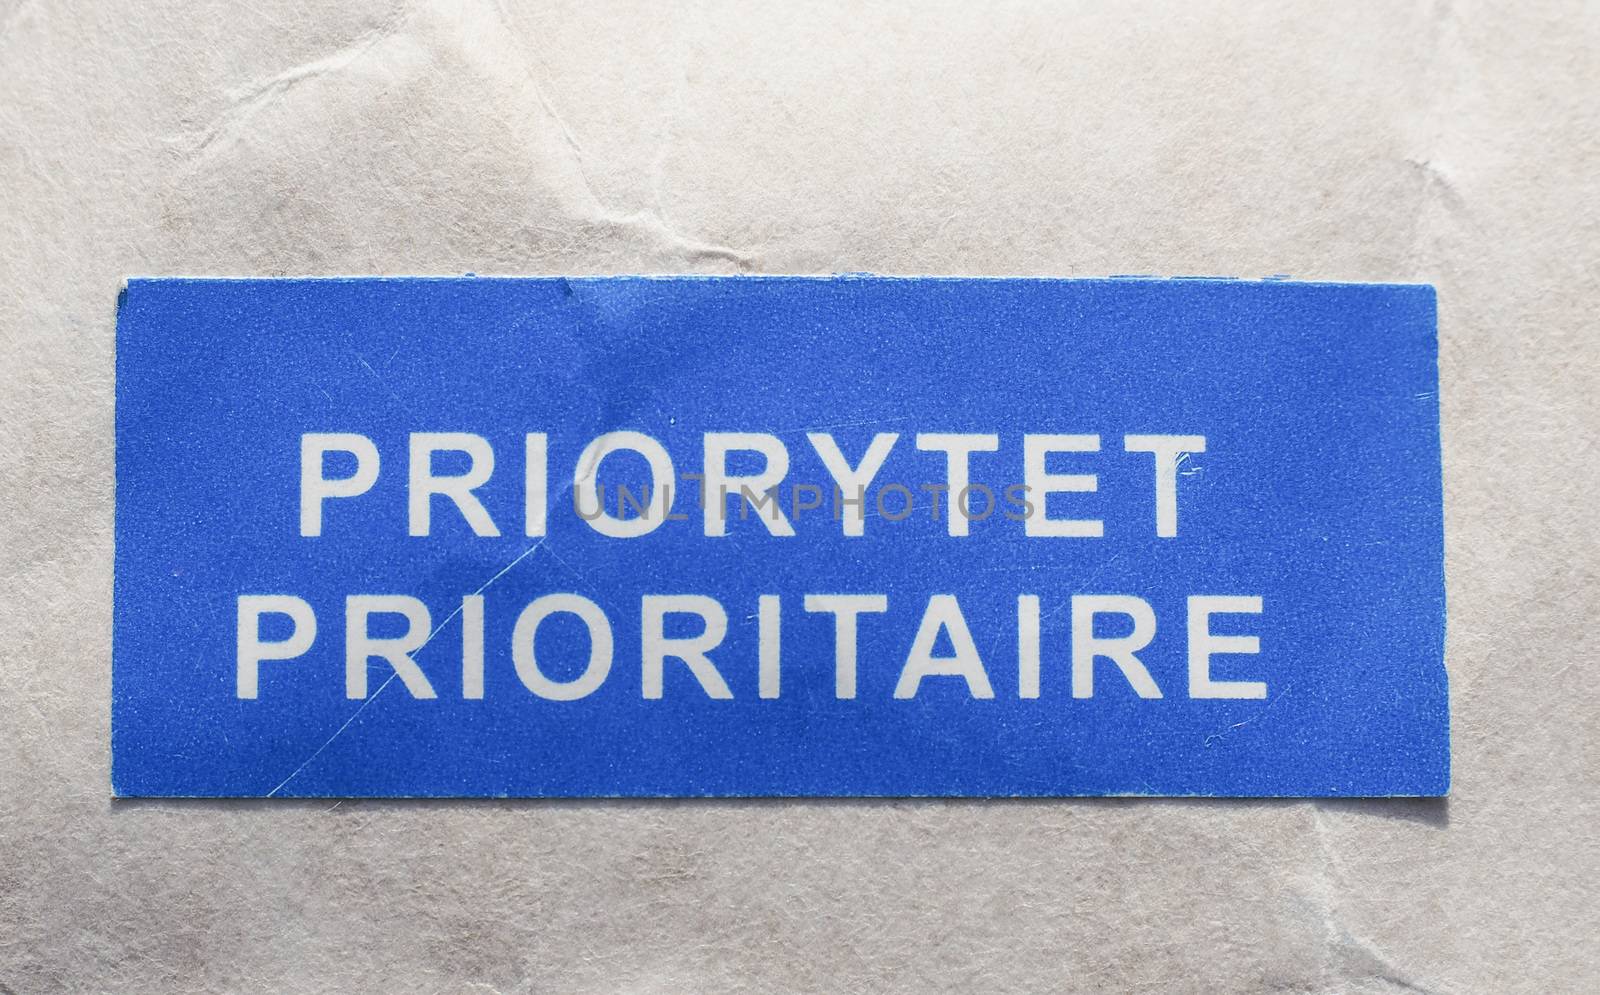 Priorytet Prioritaire - Priority mail tag from Poland